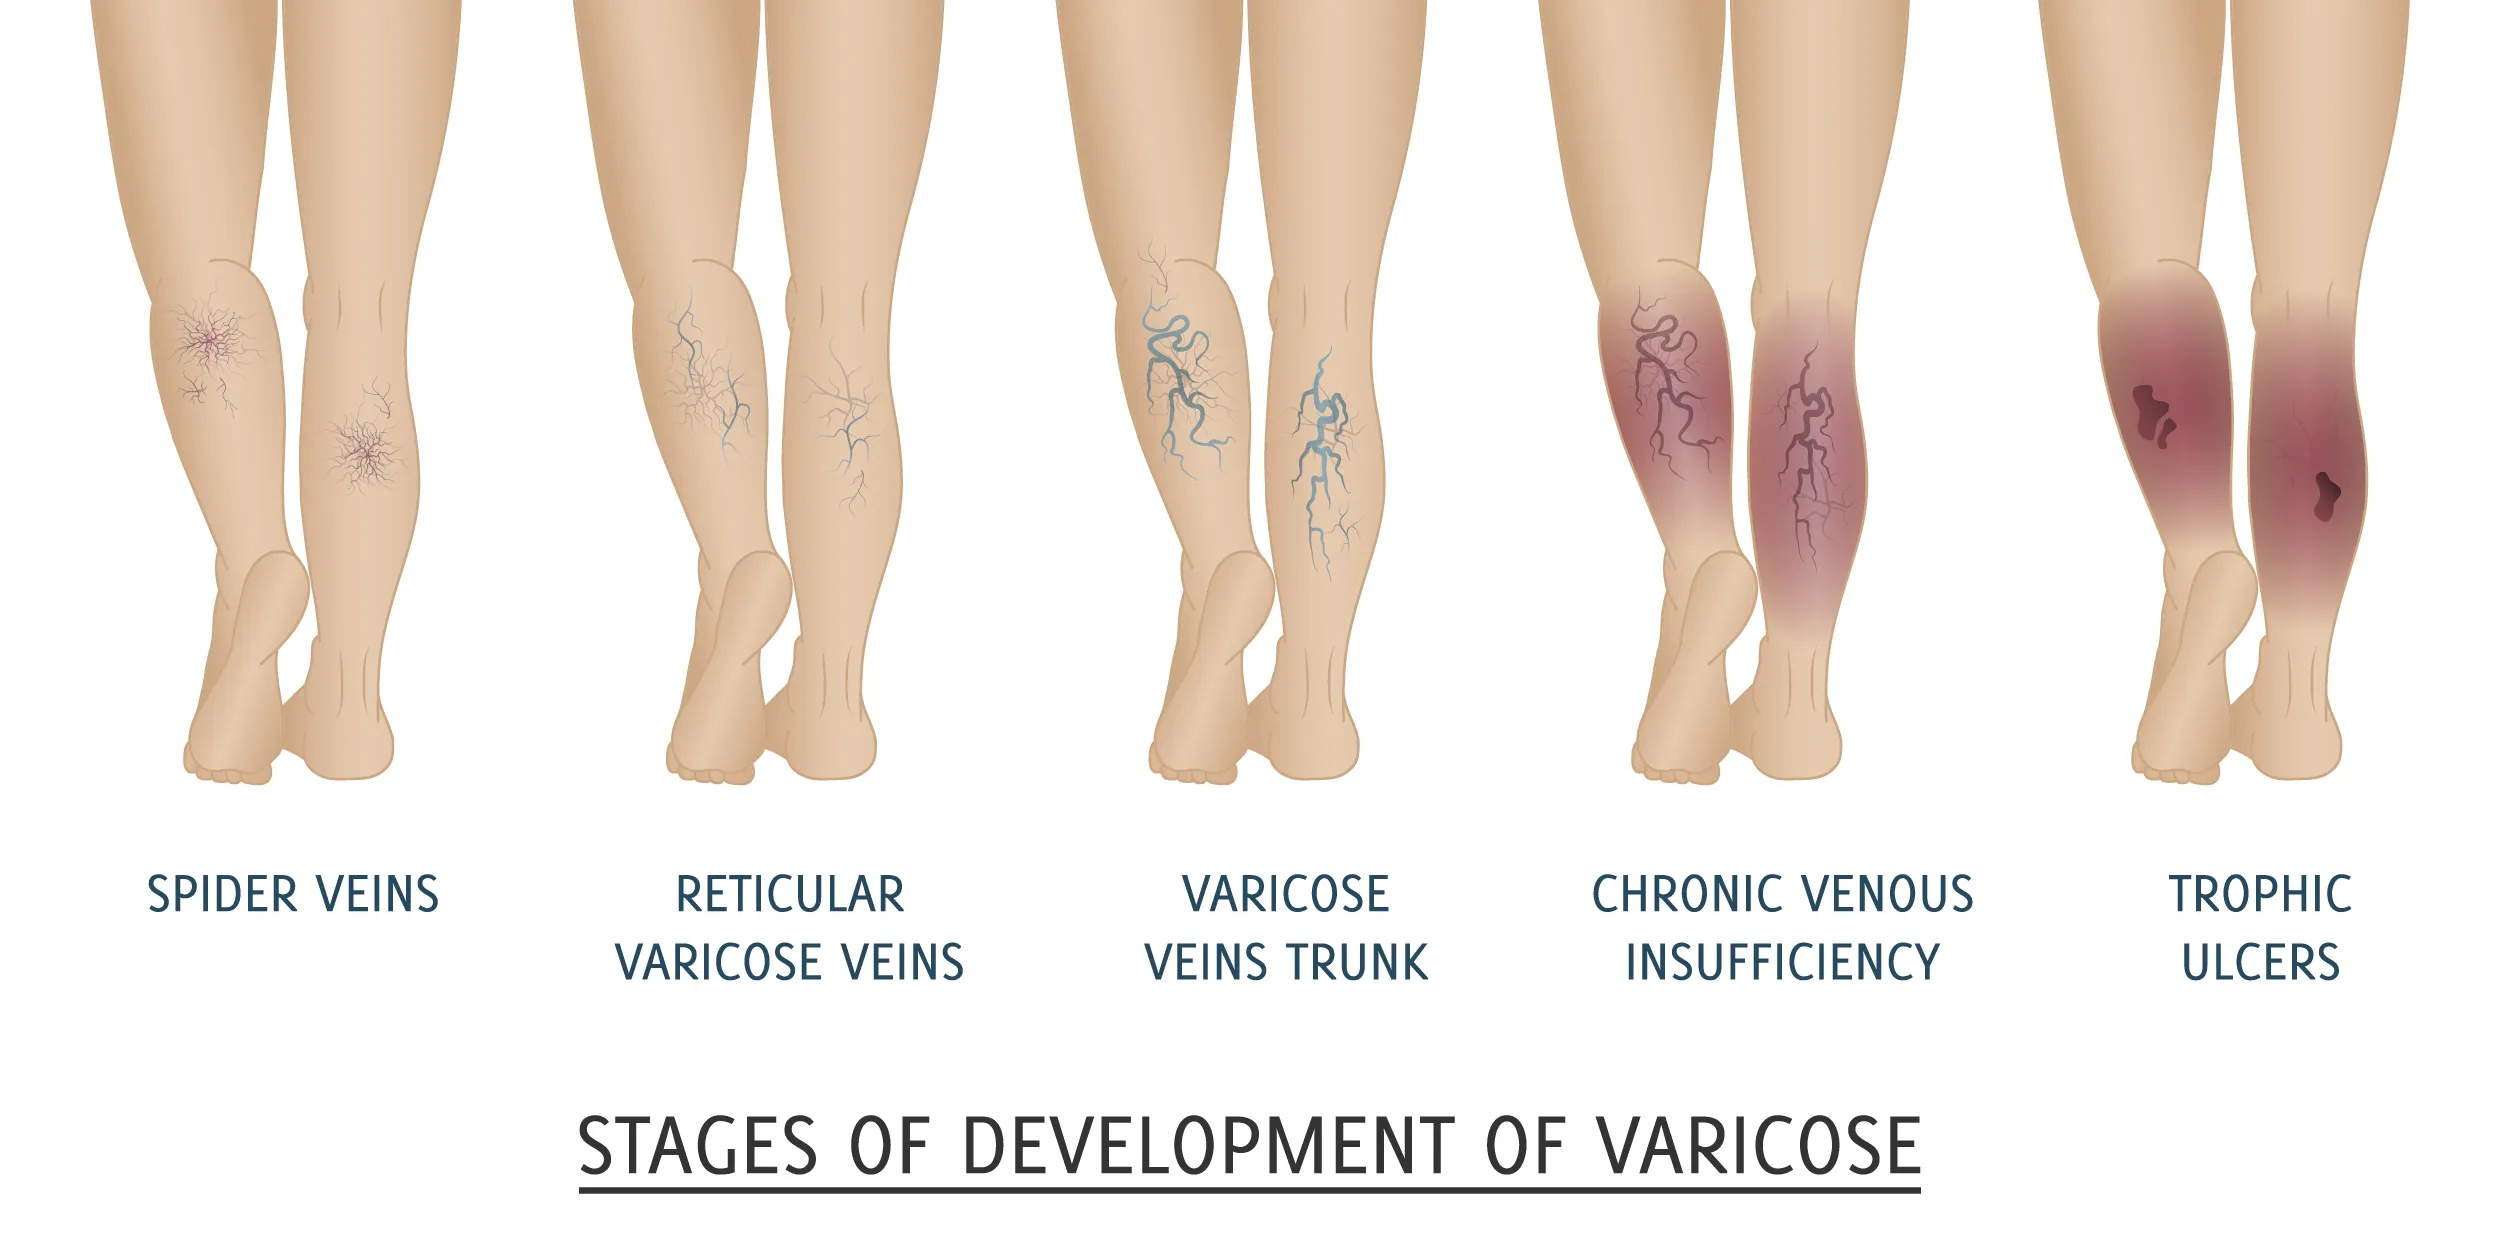 My Varicose Veins Have Red Spots. Why? Will They Go Away?